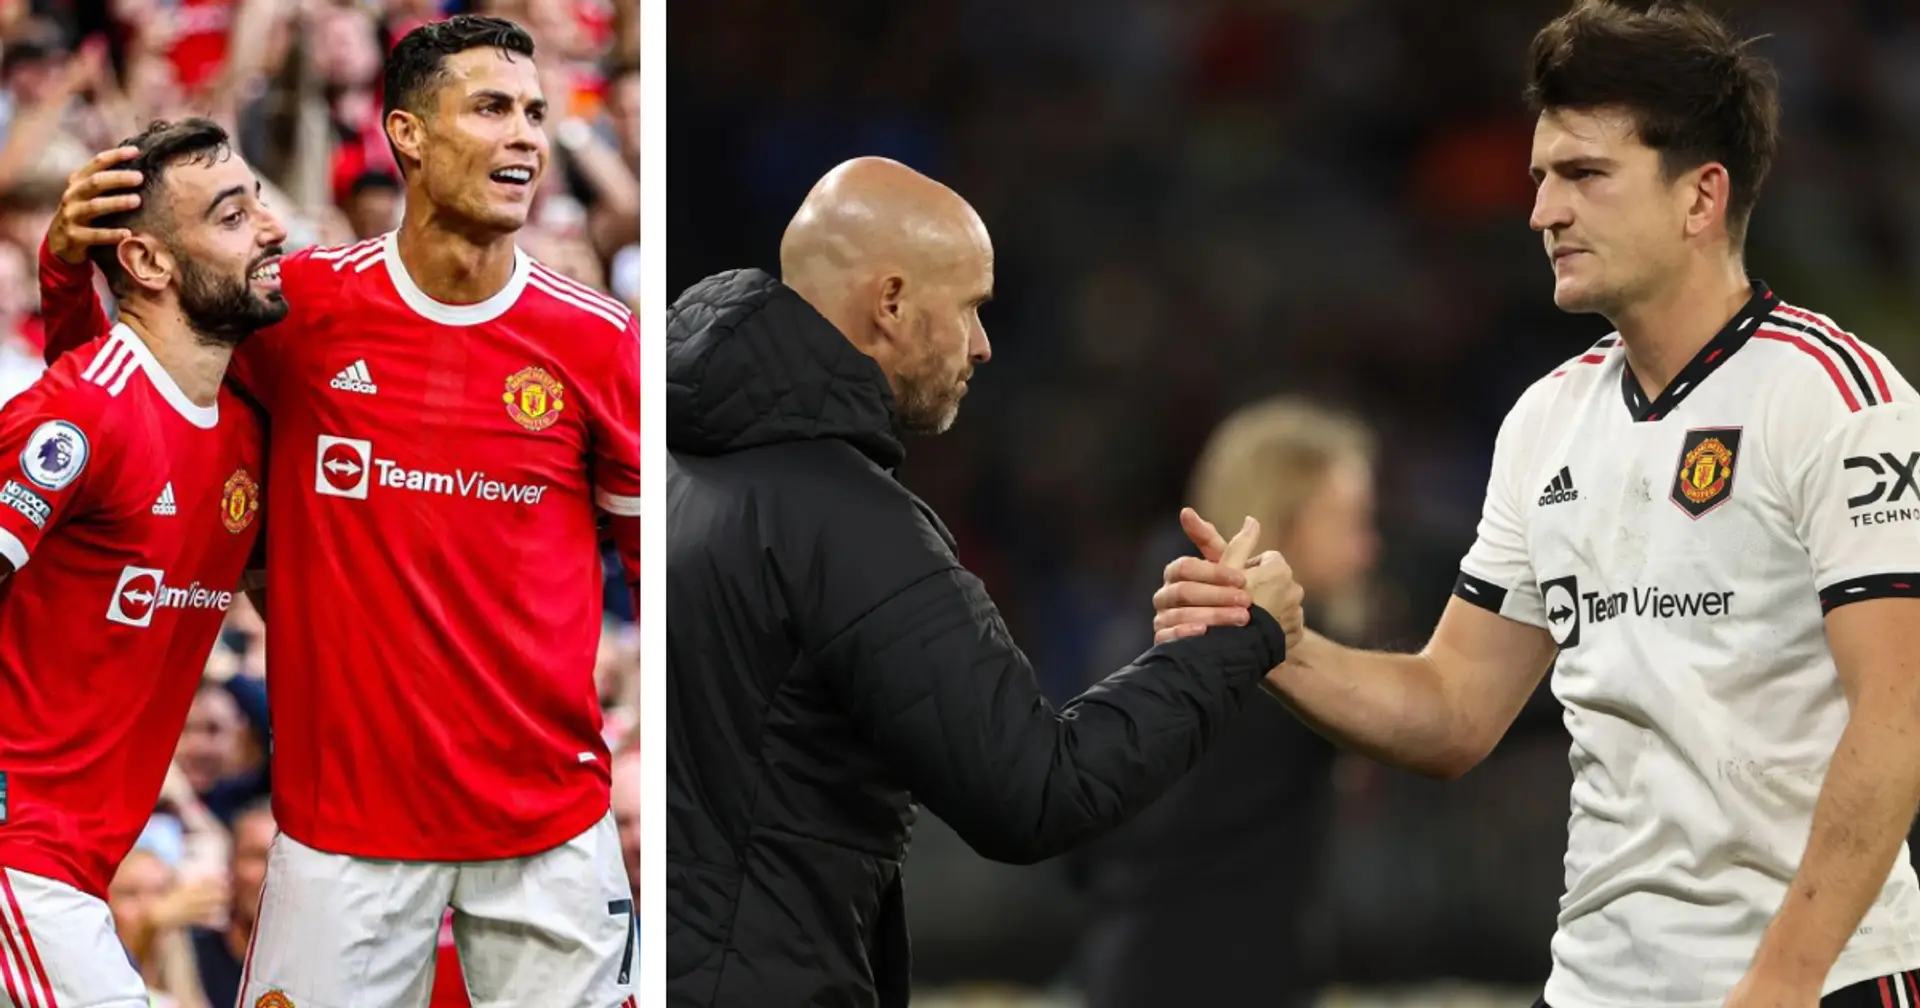 Erik ten Hag told who should replace Harry Maguire as captain — it's not Bruno or Ronaldo